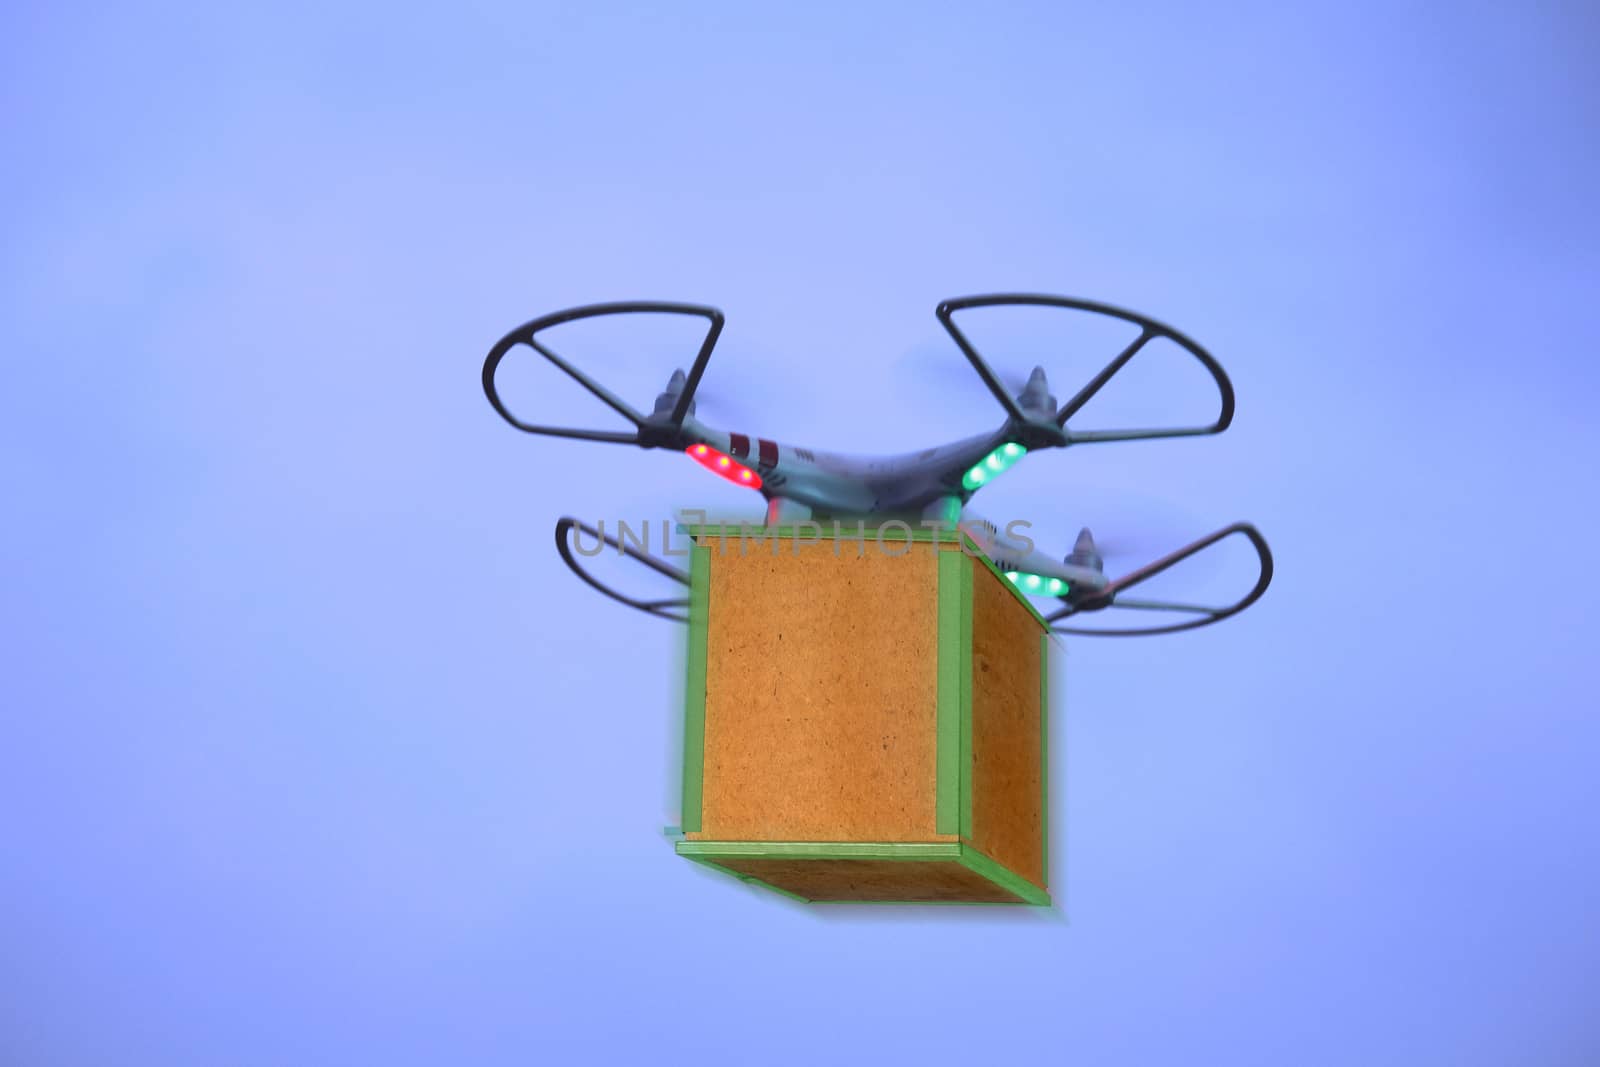 Air drone carrying carton box for fast delivery concept